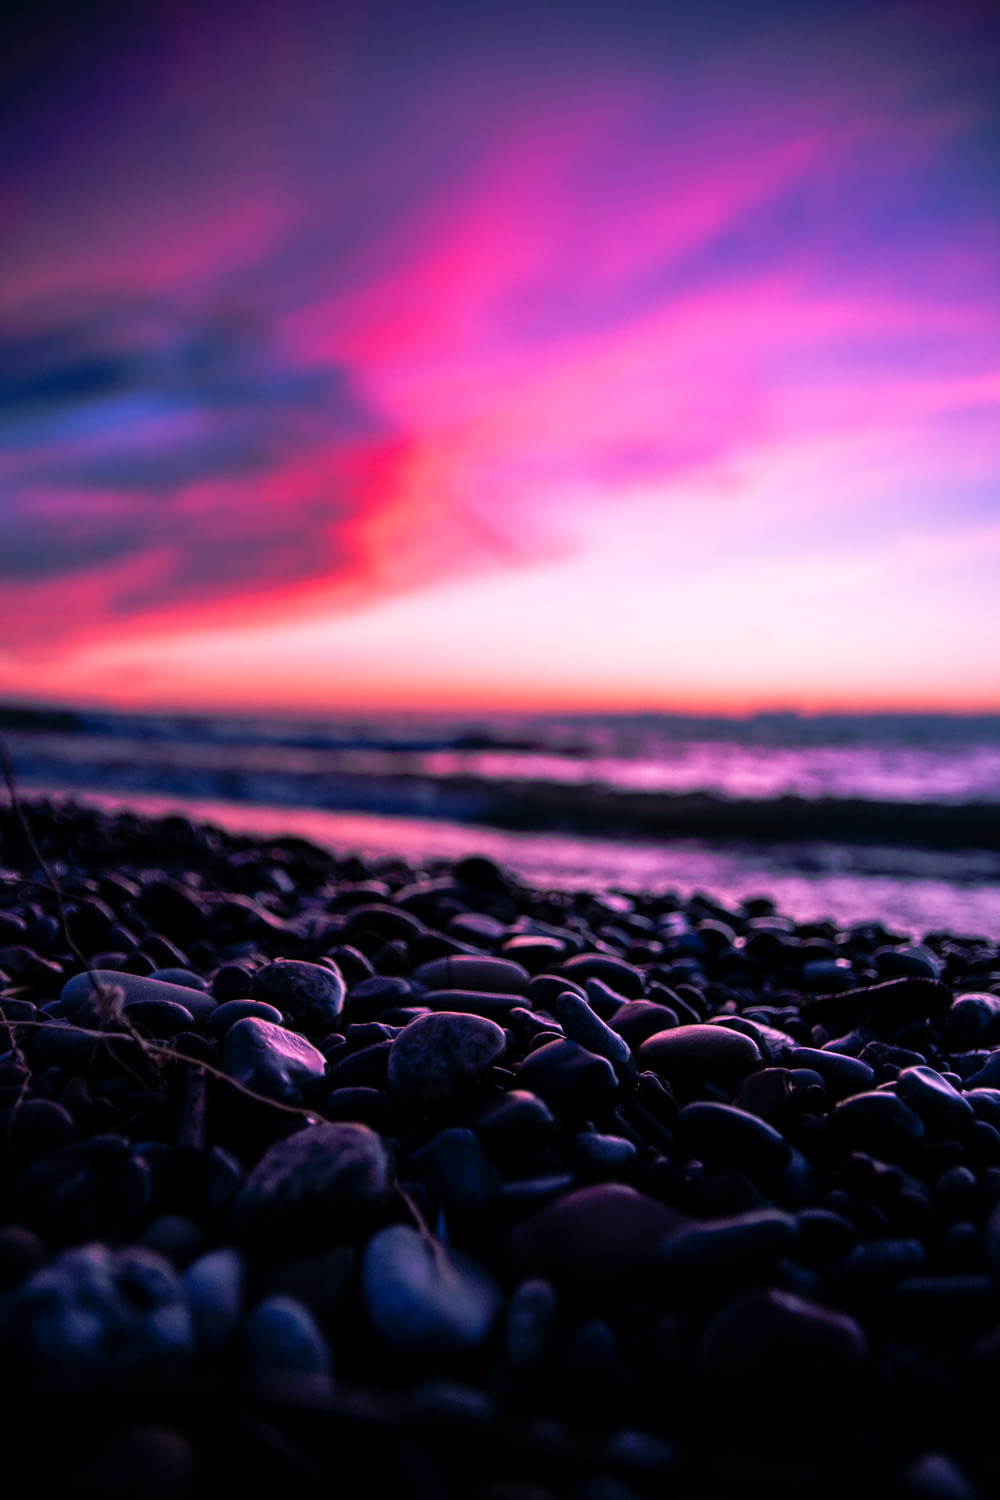 a beach with rocks and water under a colorful sky